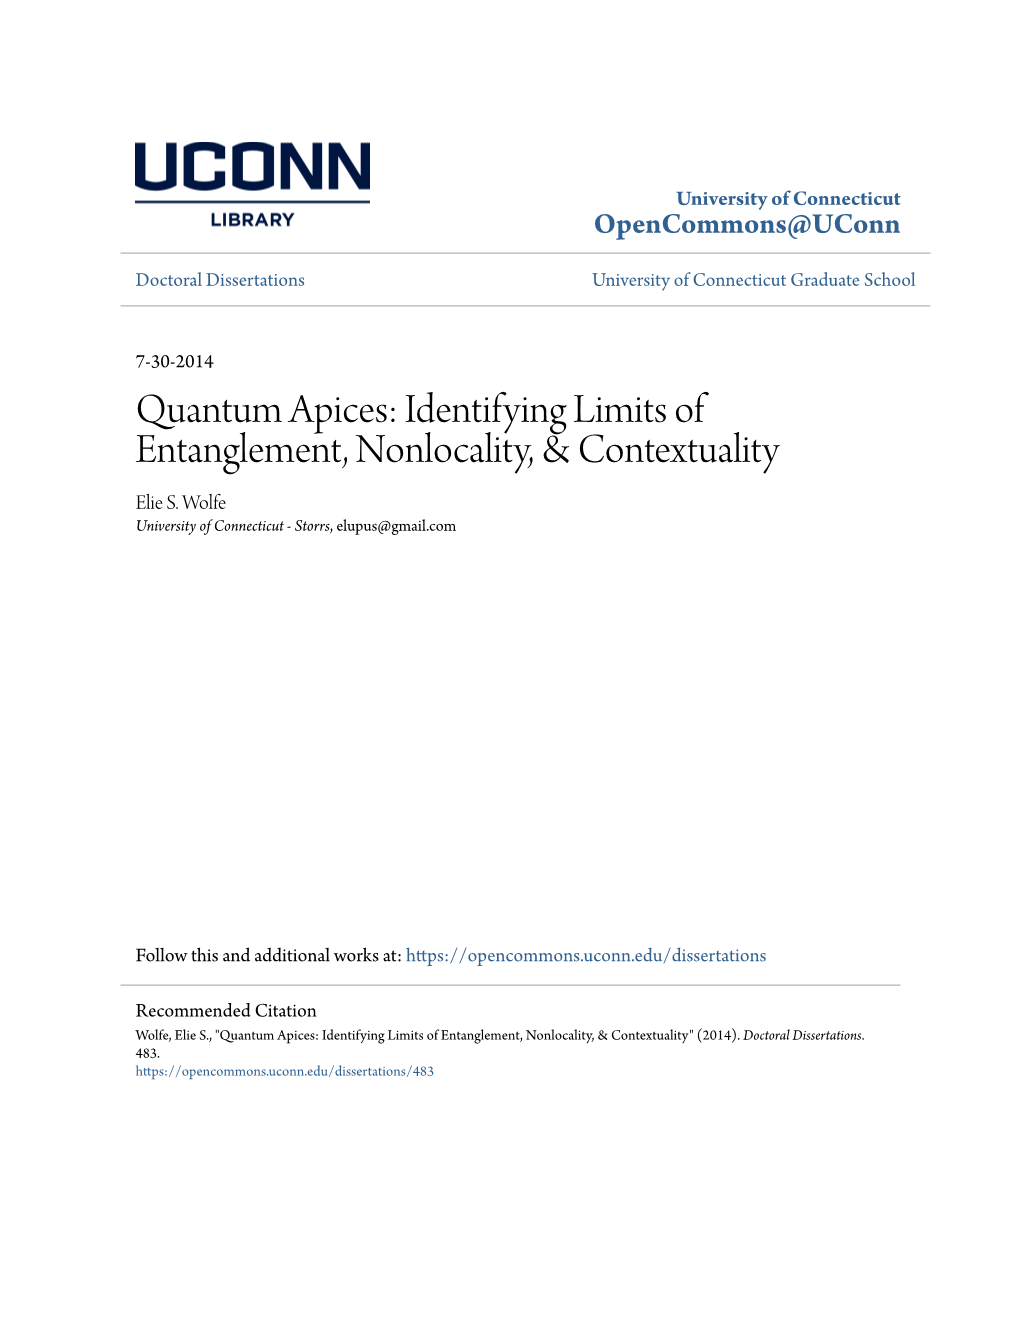 Quantum Apices: Identifying Limits of Entanglement, Nonlocality, & Contextuality Elie S